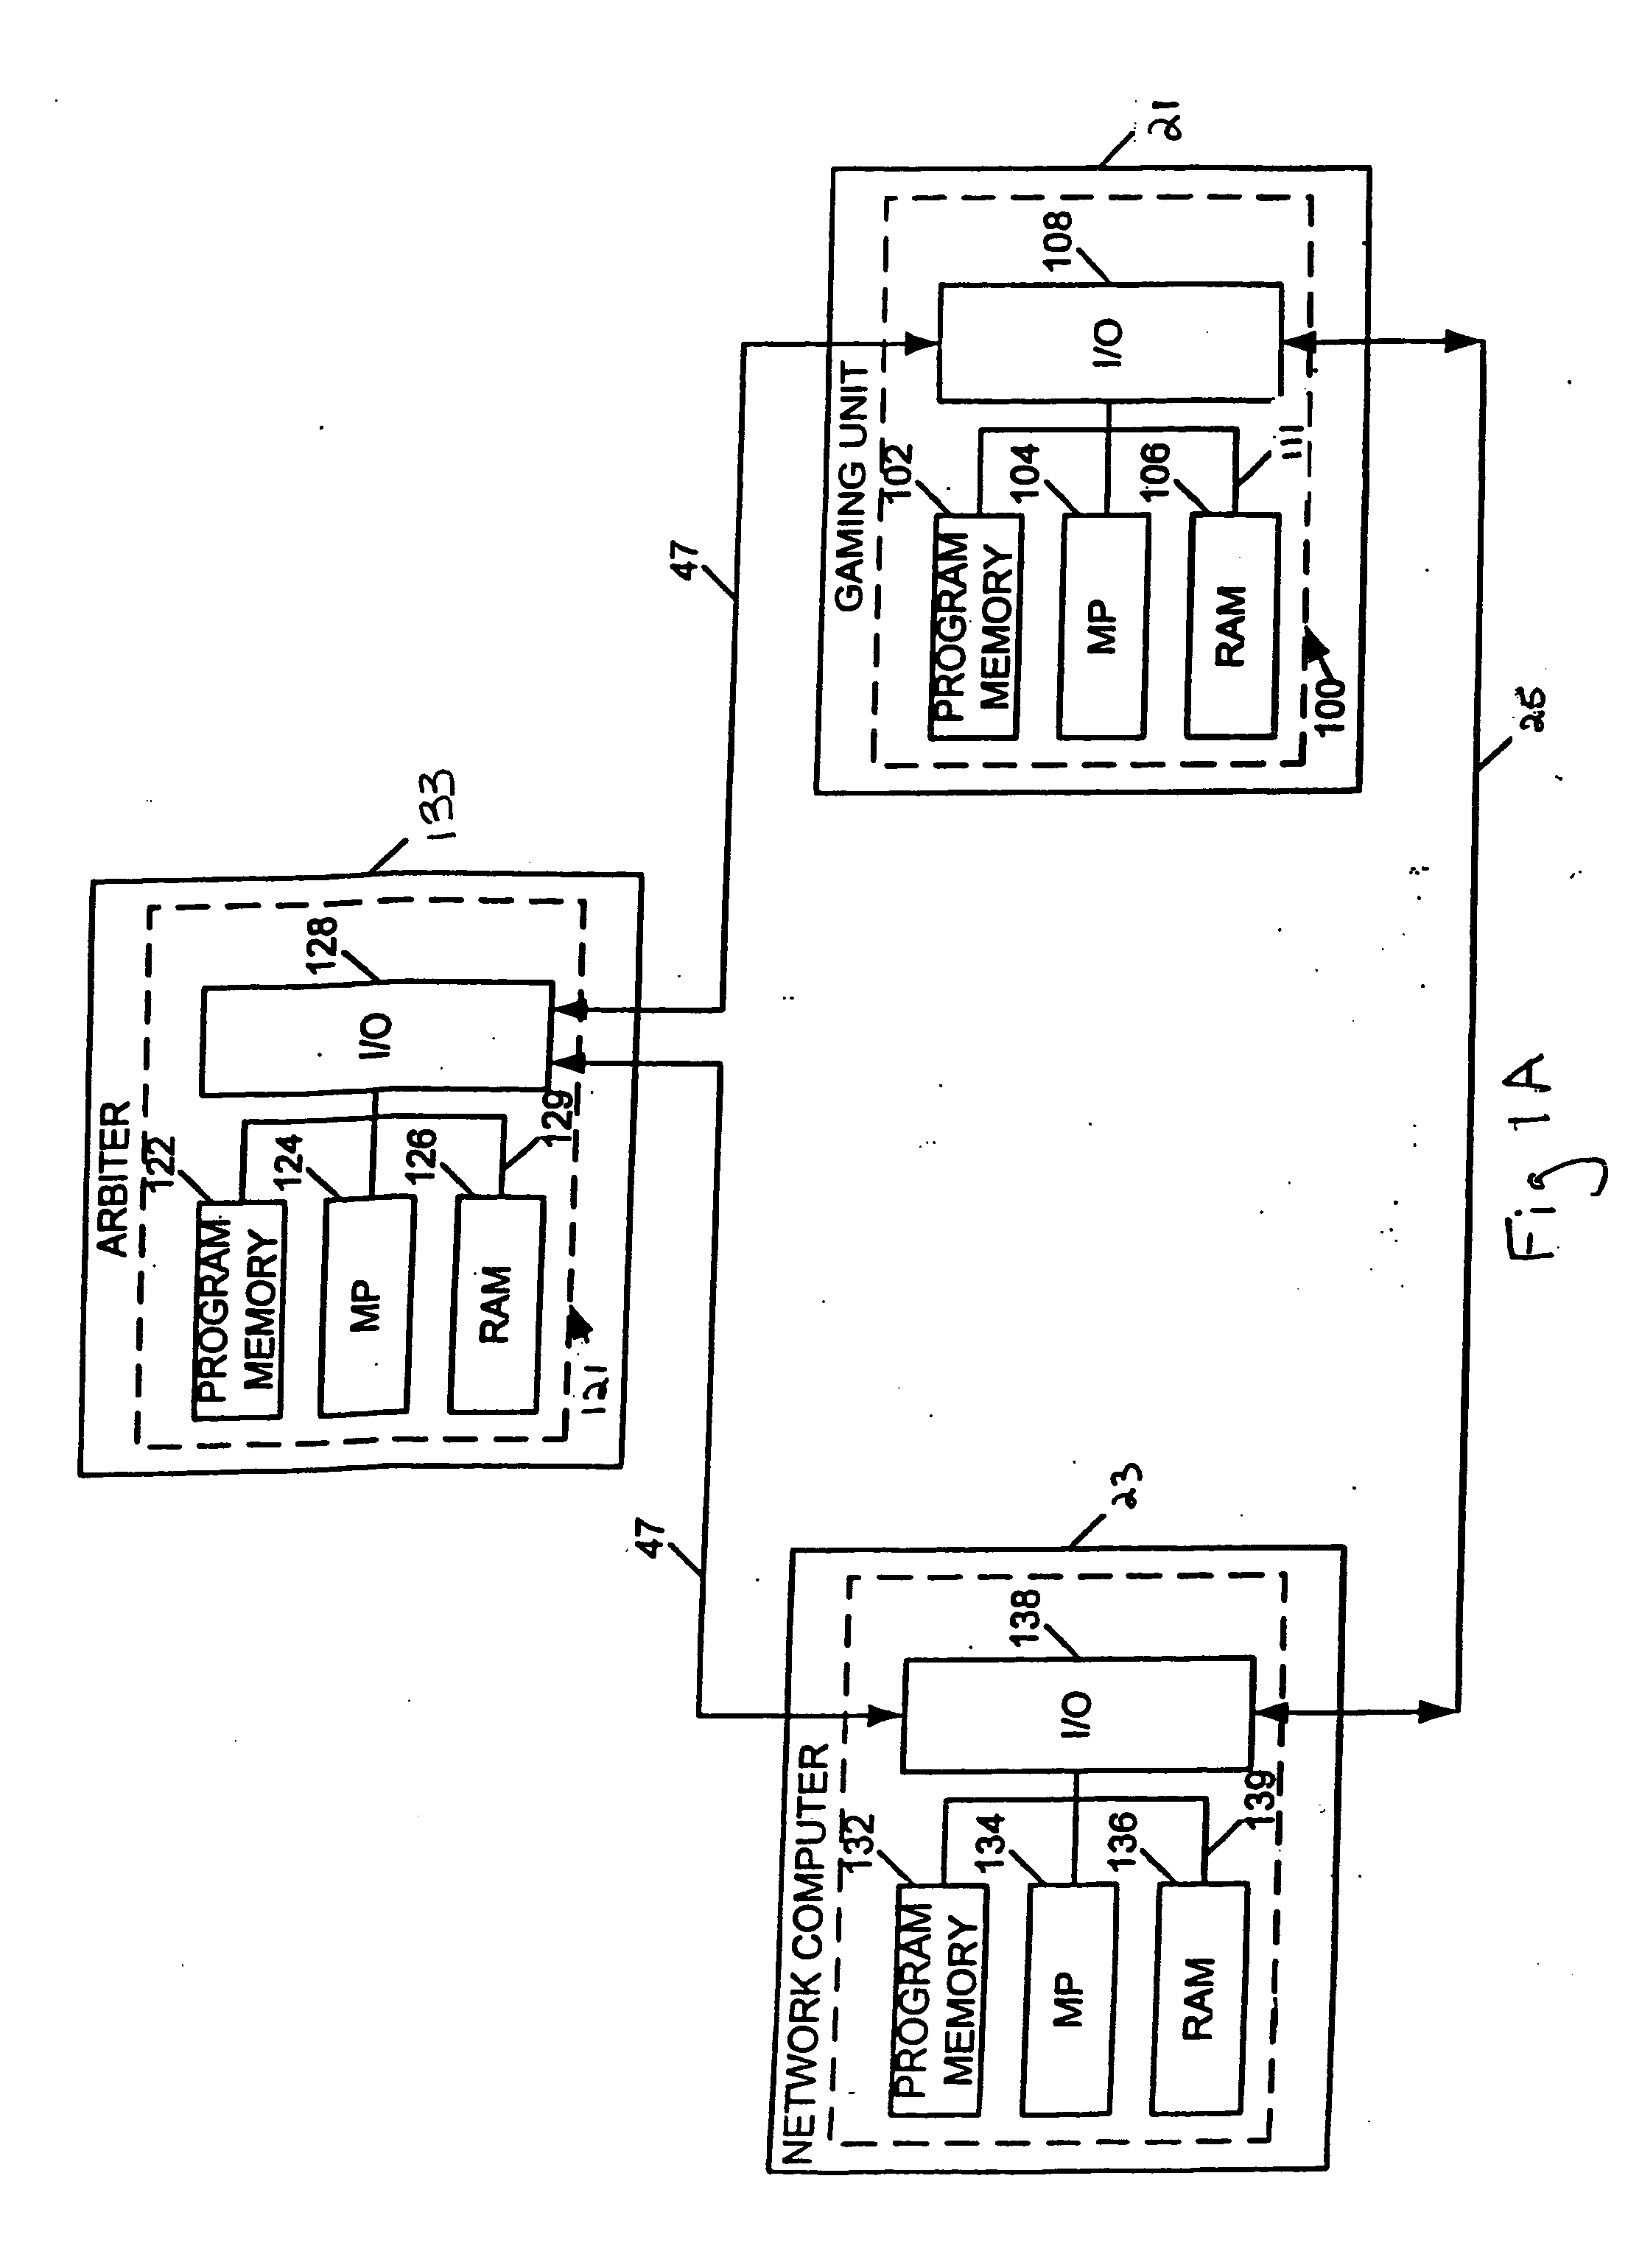 Methods and devices for managing gaming networks